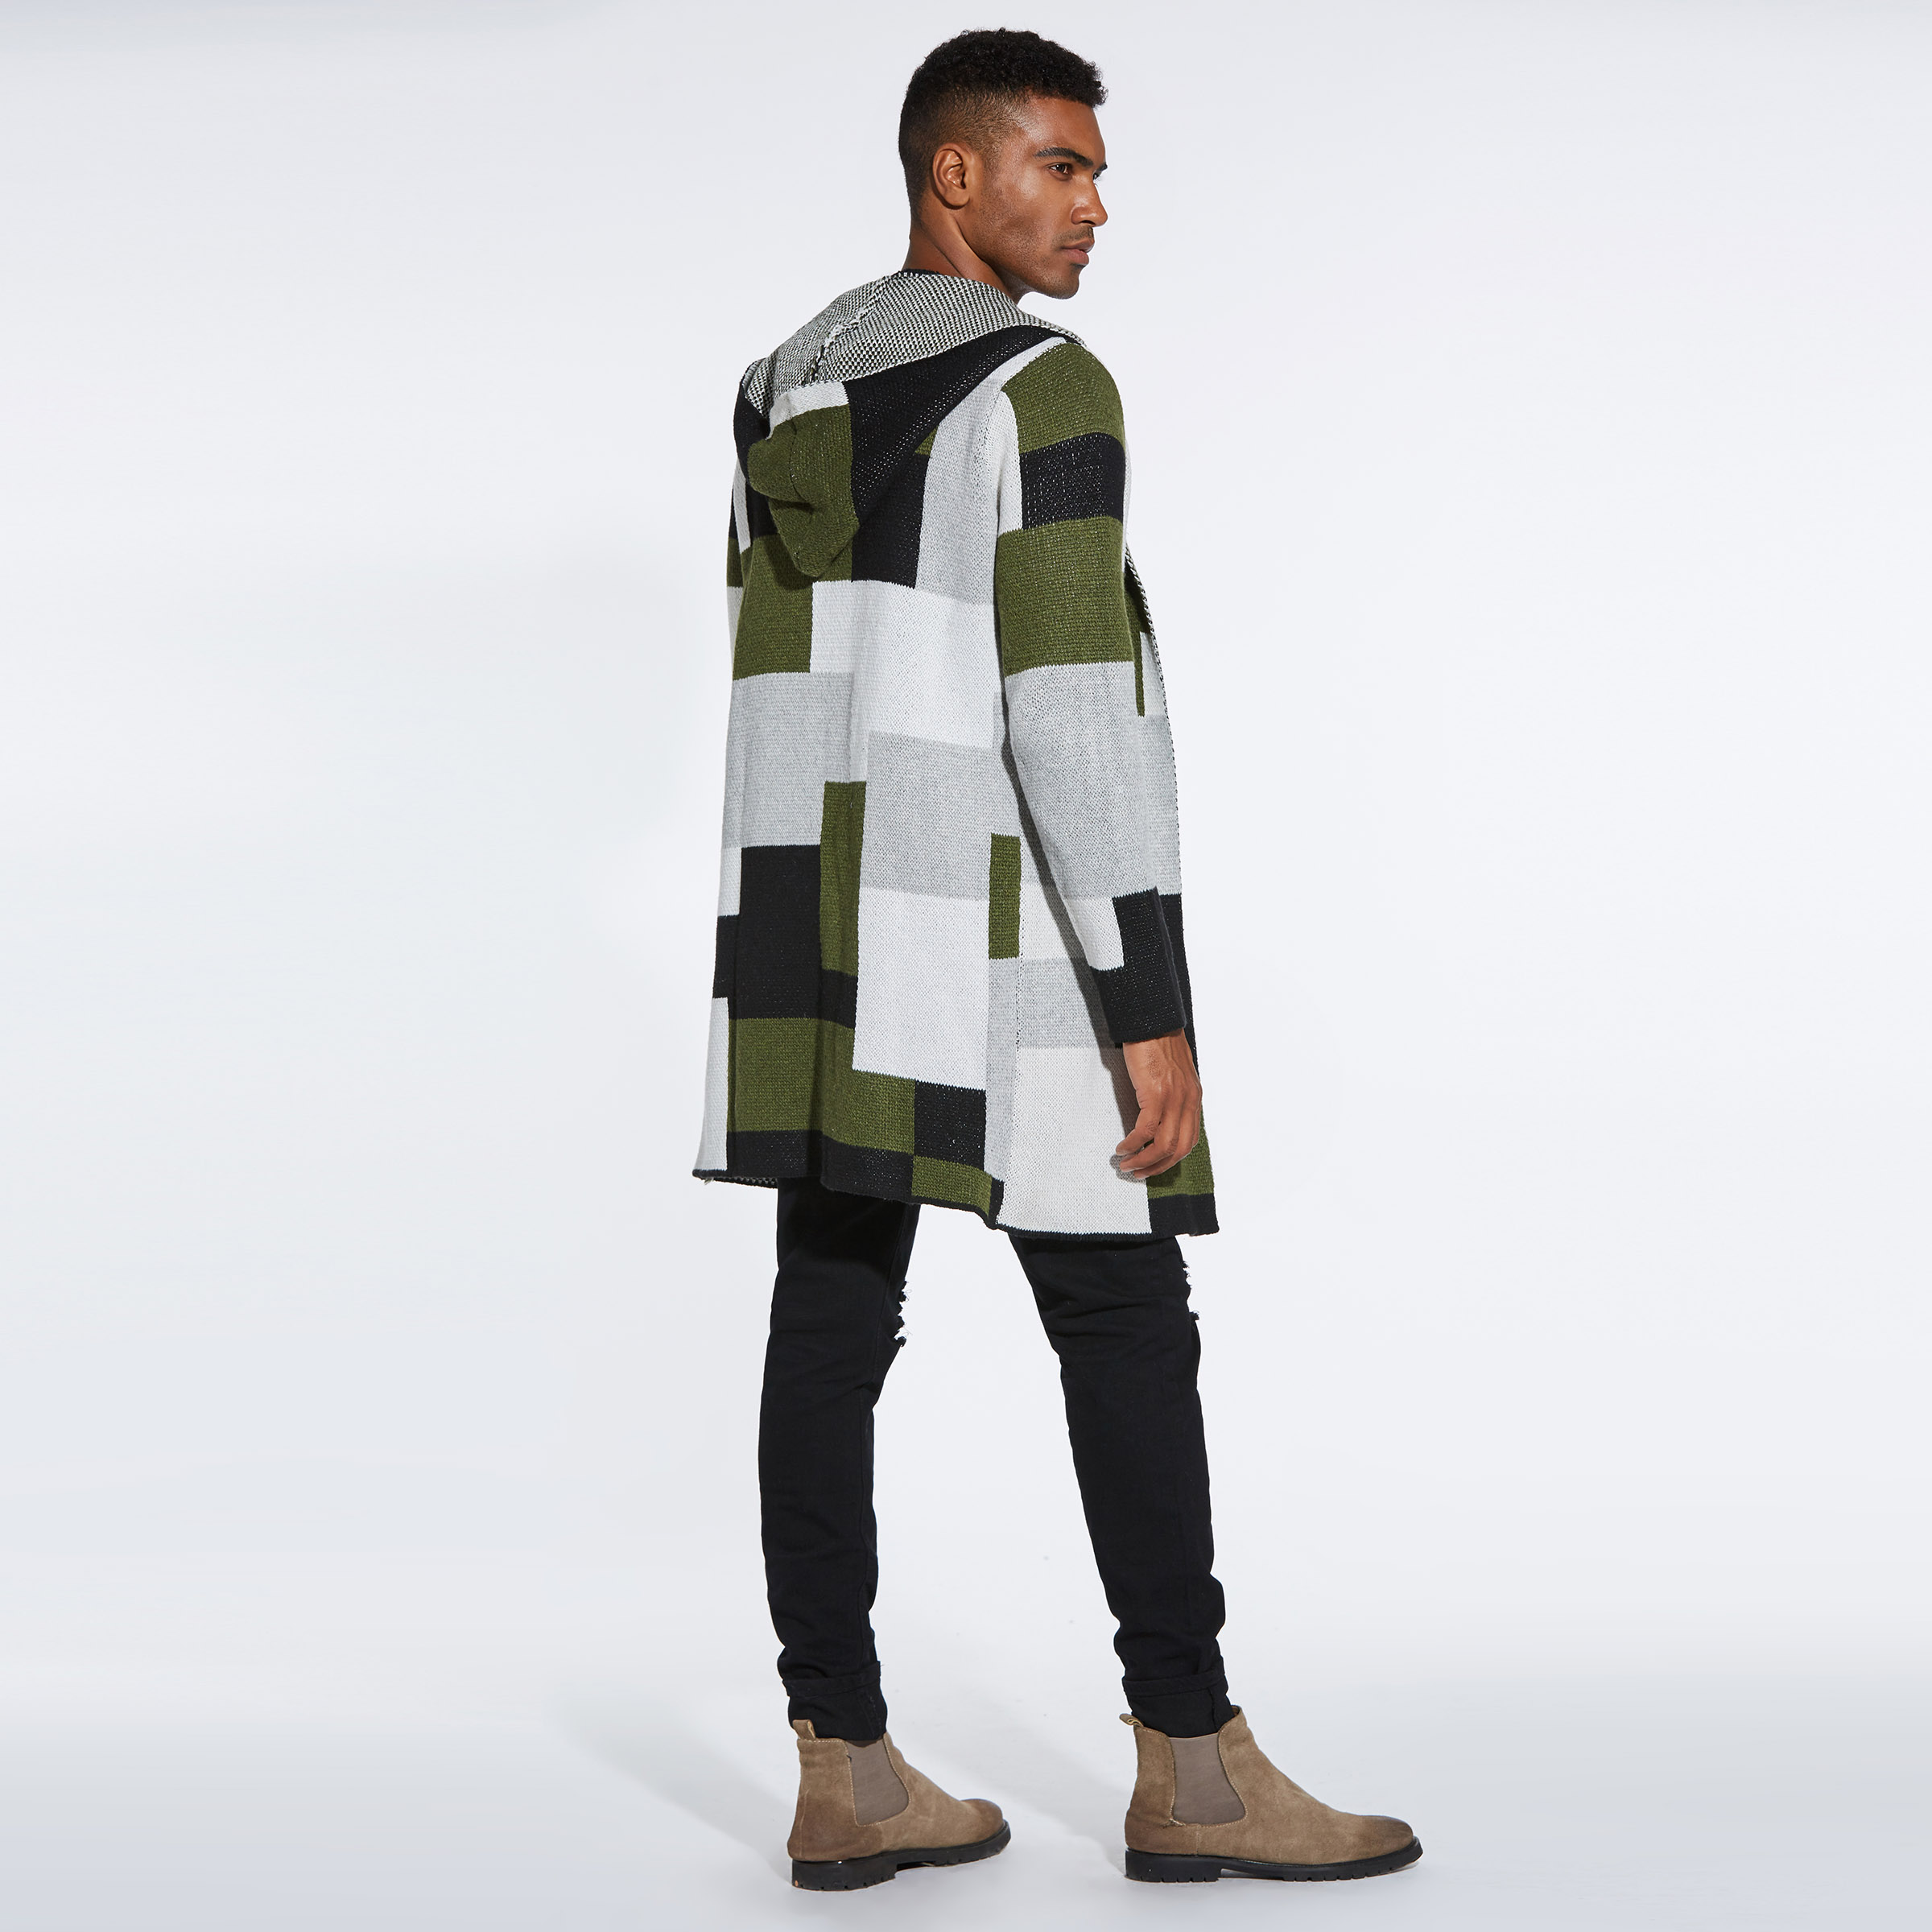 Ericdress Patchwork Mid-Length Hooded Mens Winter Cardigan Sweaters